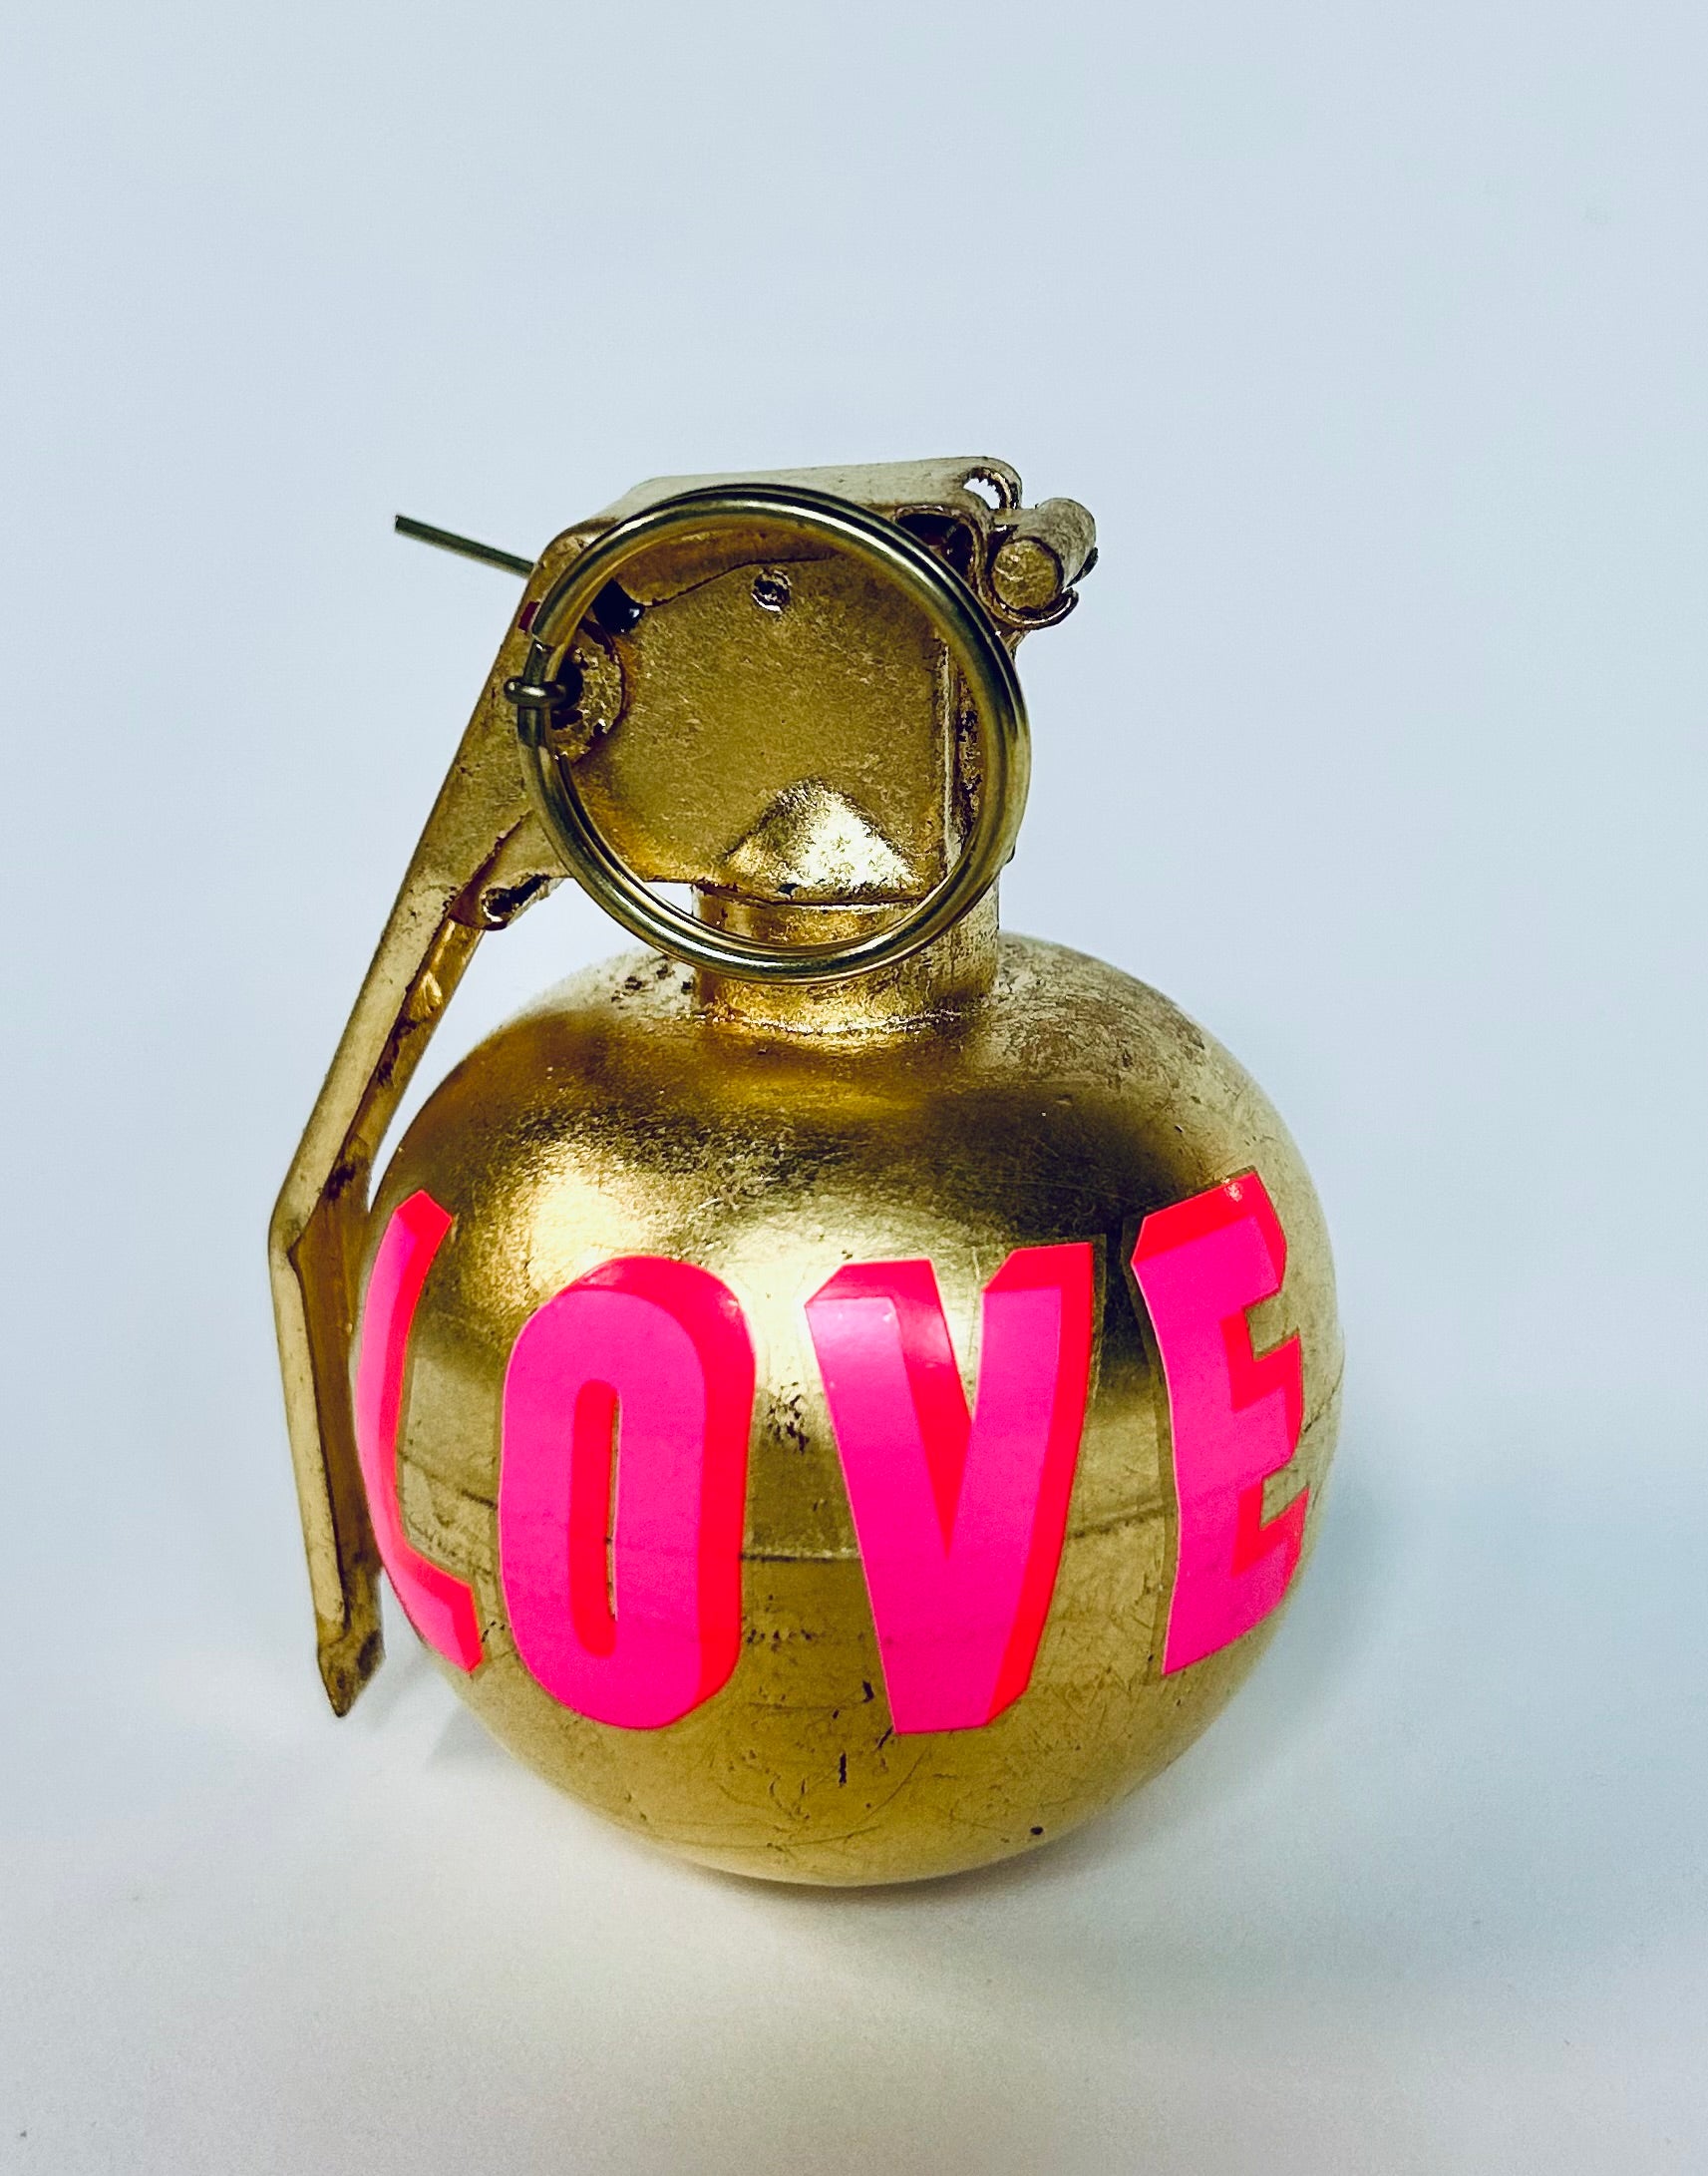 Love　Dave　by　grenade　Art　Bomb　Gallery　–　Egg　Buonoaguidi　East